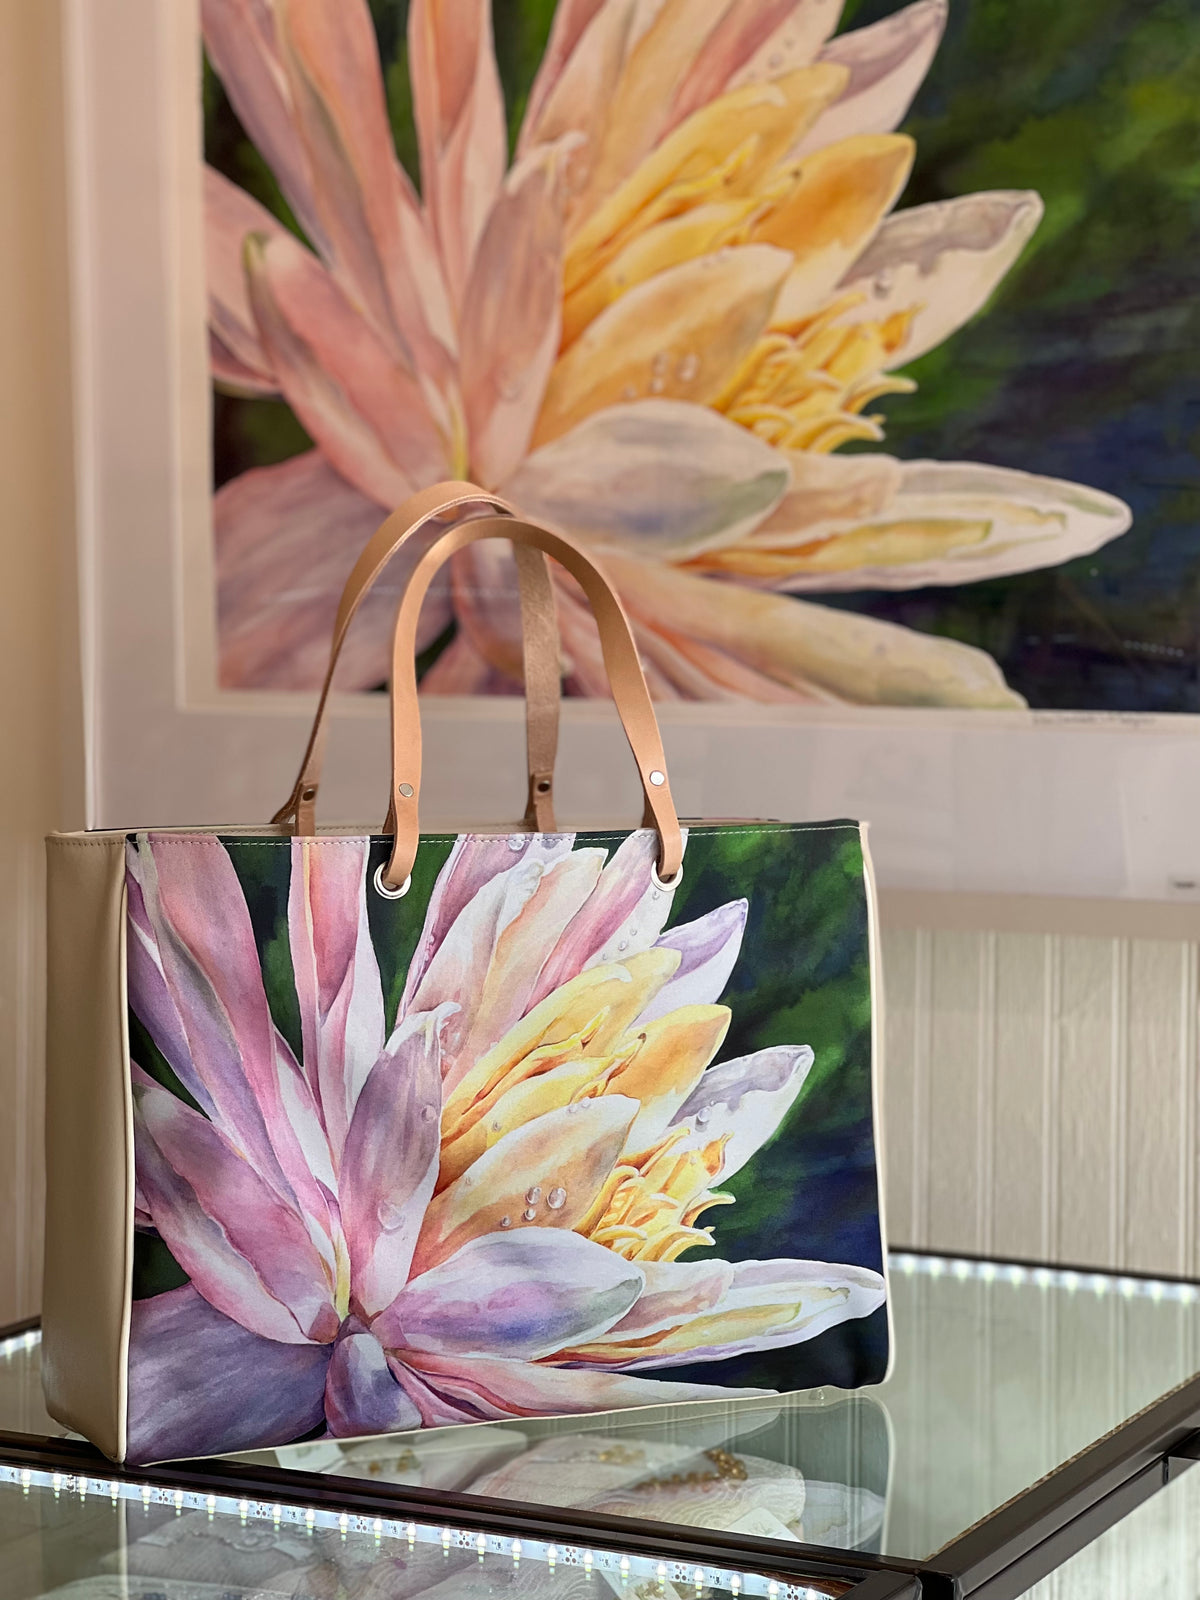 Custom nappa leather and satin handbag with the watercolor artwork by Eileen Baumeister McIntyre at Garden of Silver in Westhampton Beach, NY 